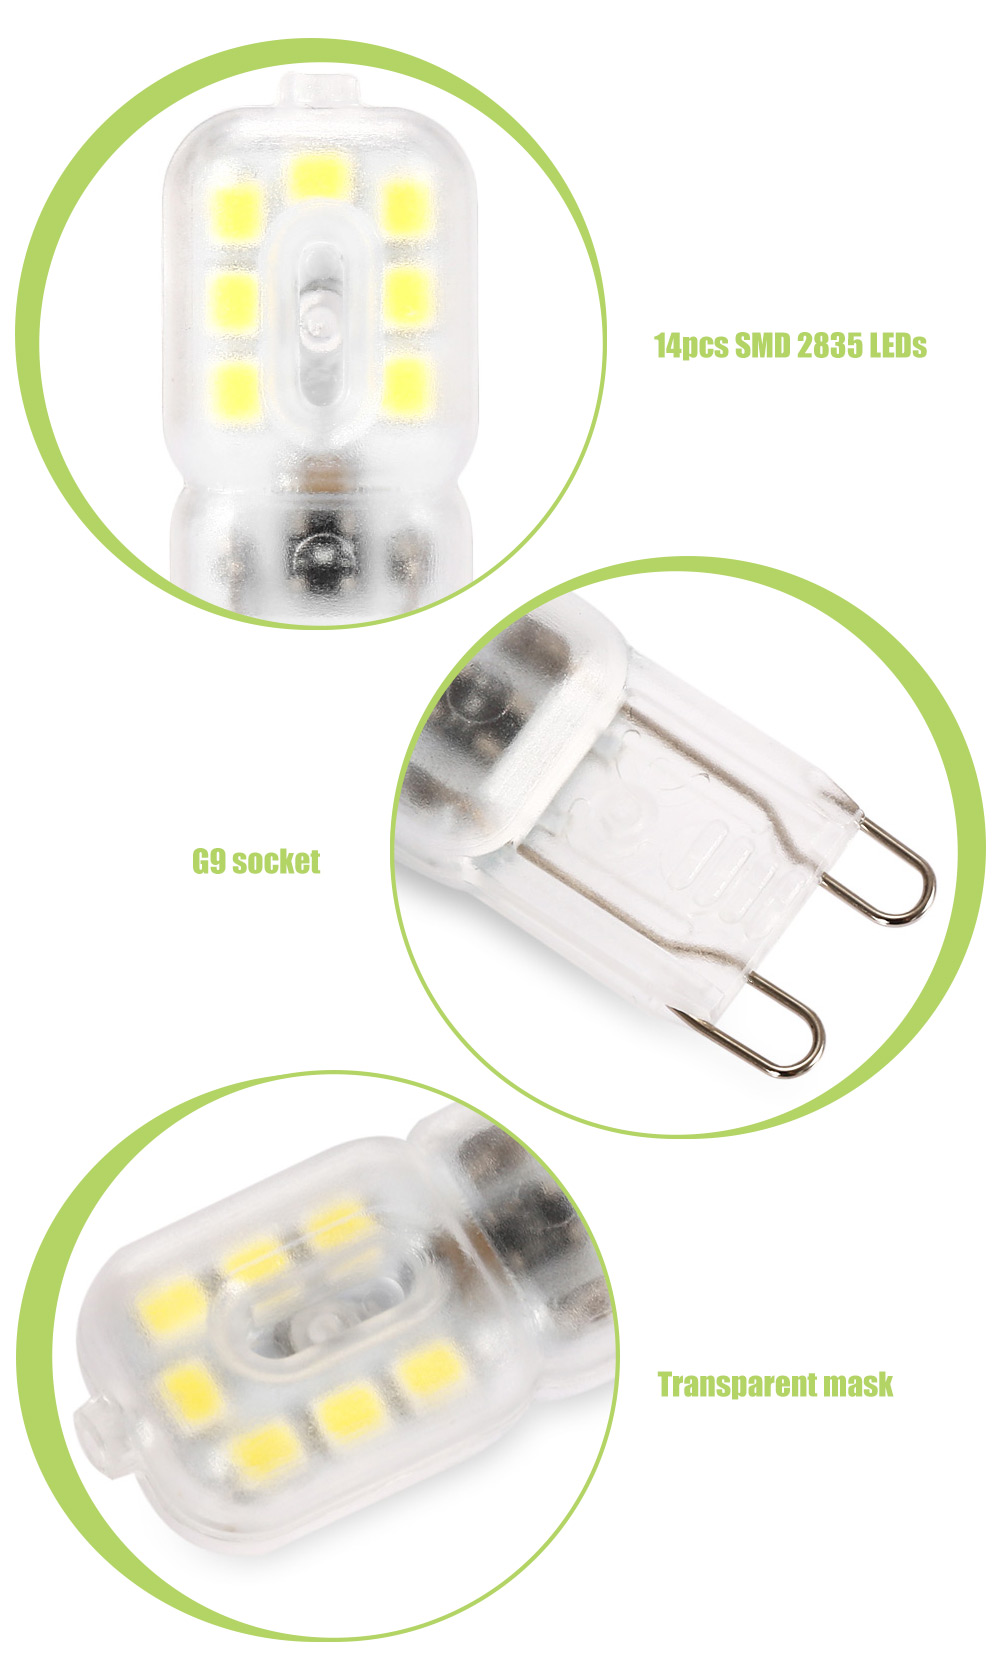 G9 220V 2.5W 200 - 250LM 14 LEDs Dimmable Light Bulb with Transparent Mask